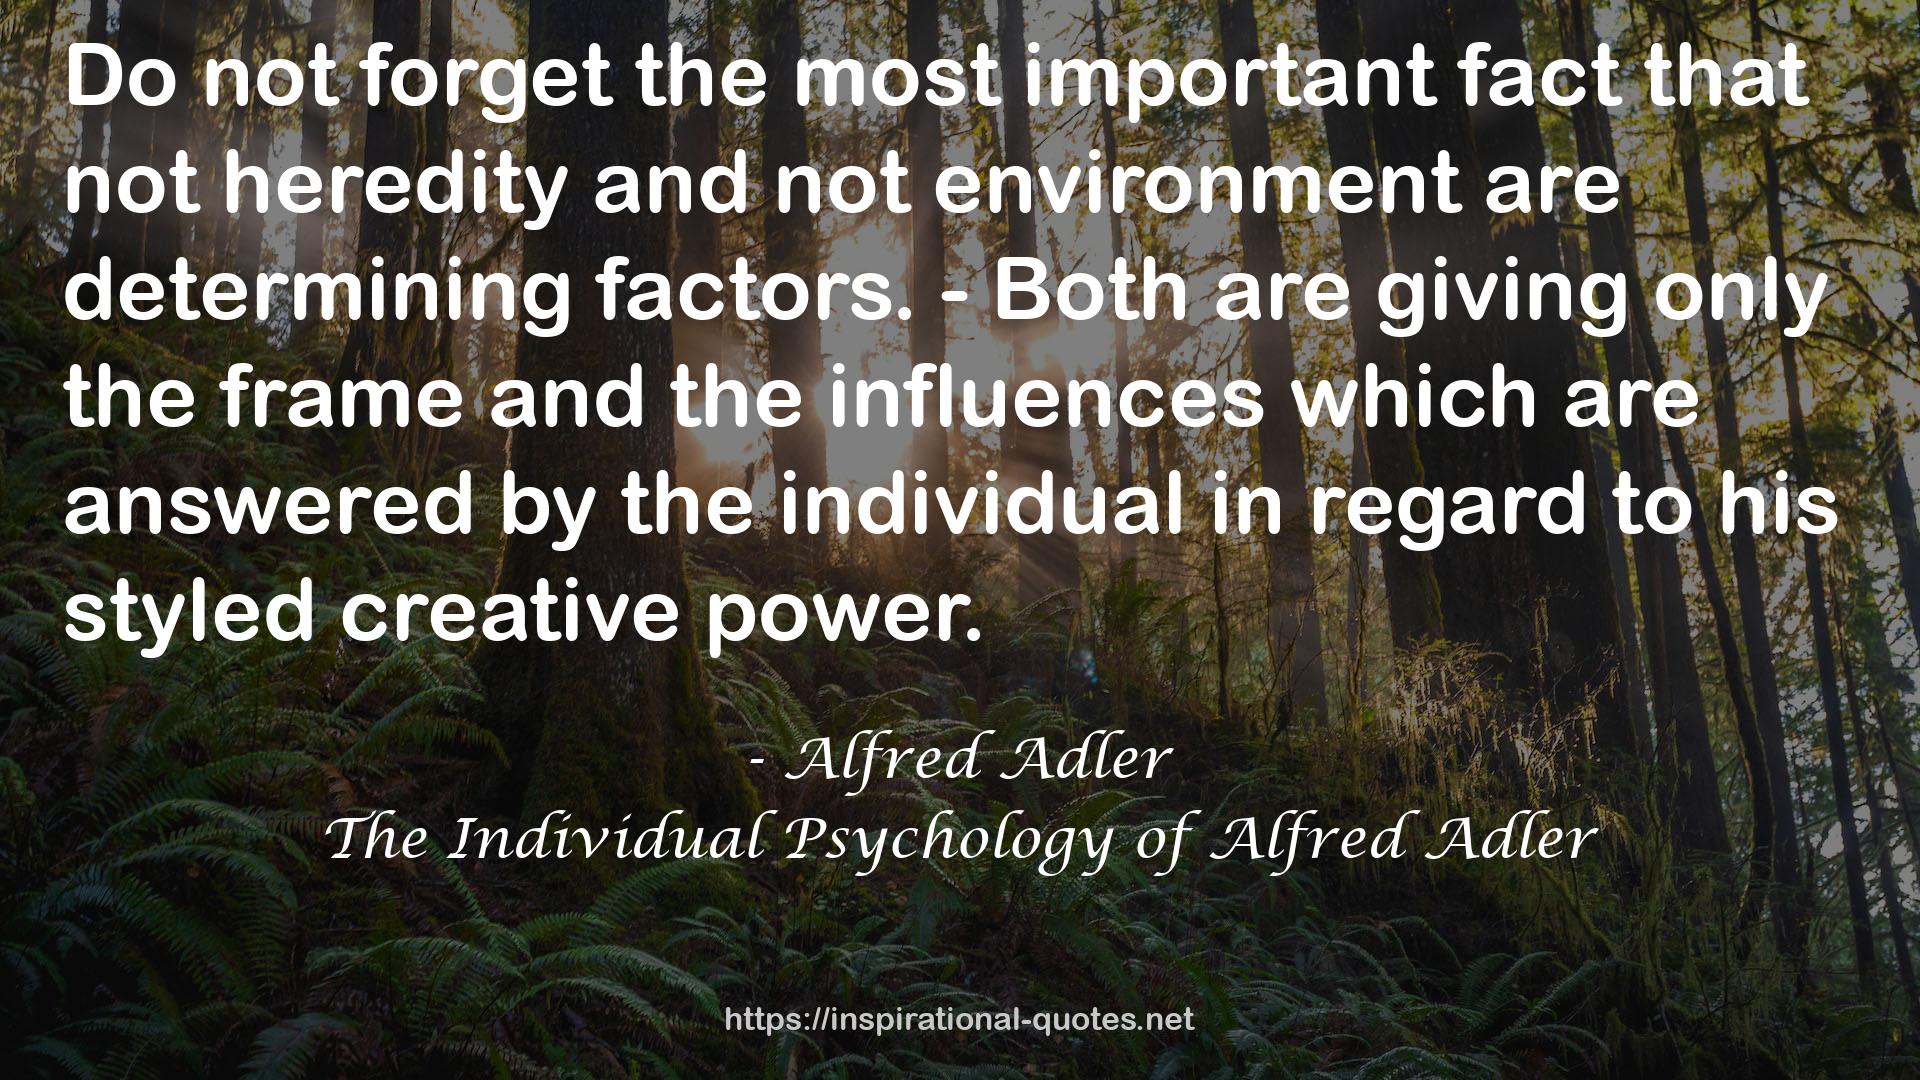 The Individual Psychology of Alfred Adler QUOTES